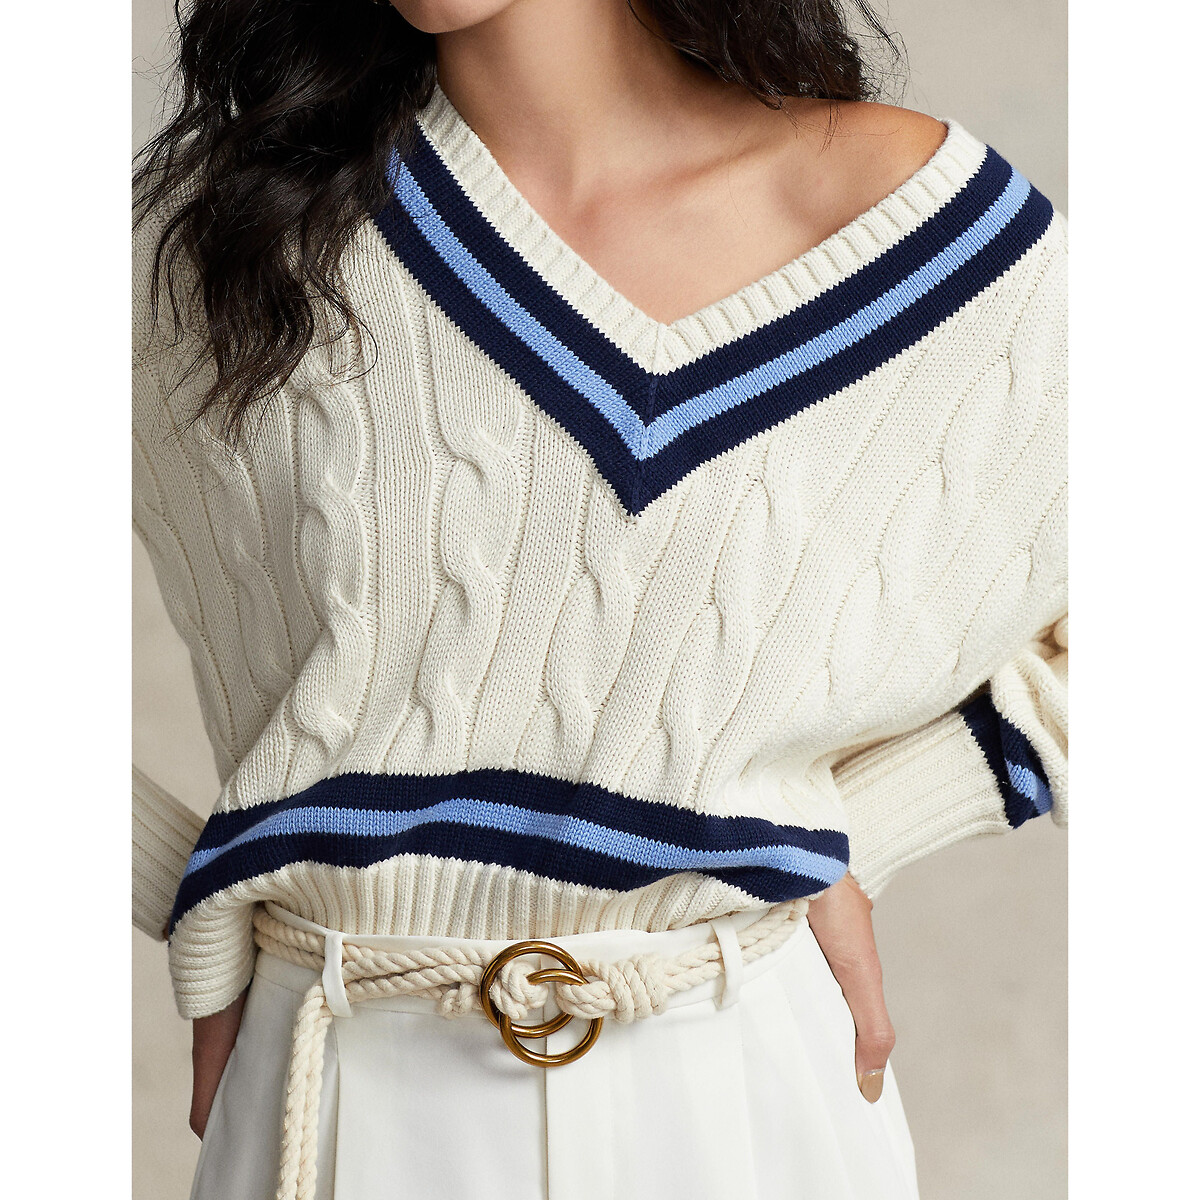 Cotton Short Cricket Jumper in Cable Knit with V-Neck